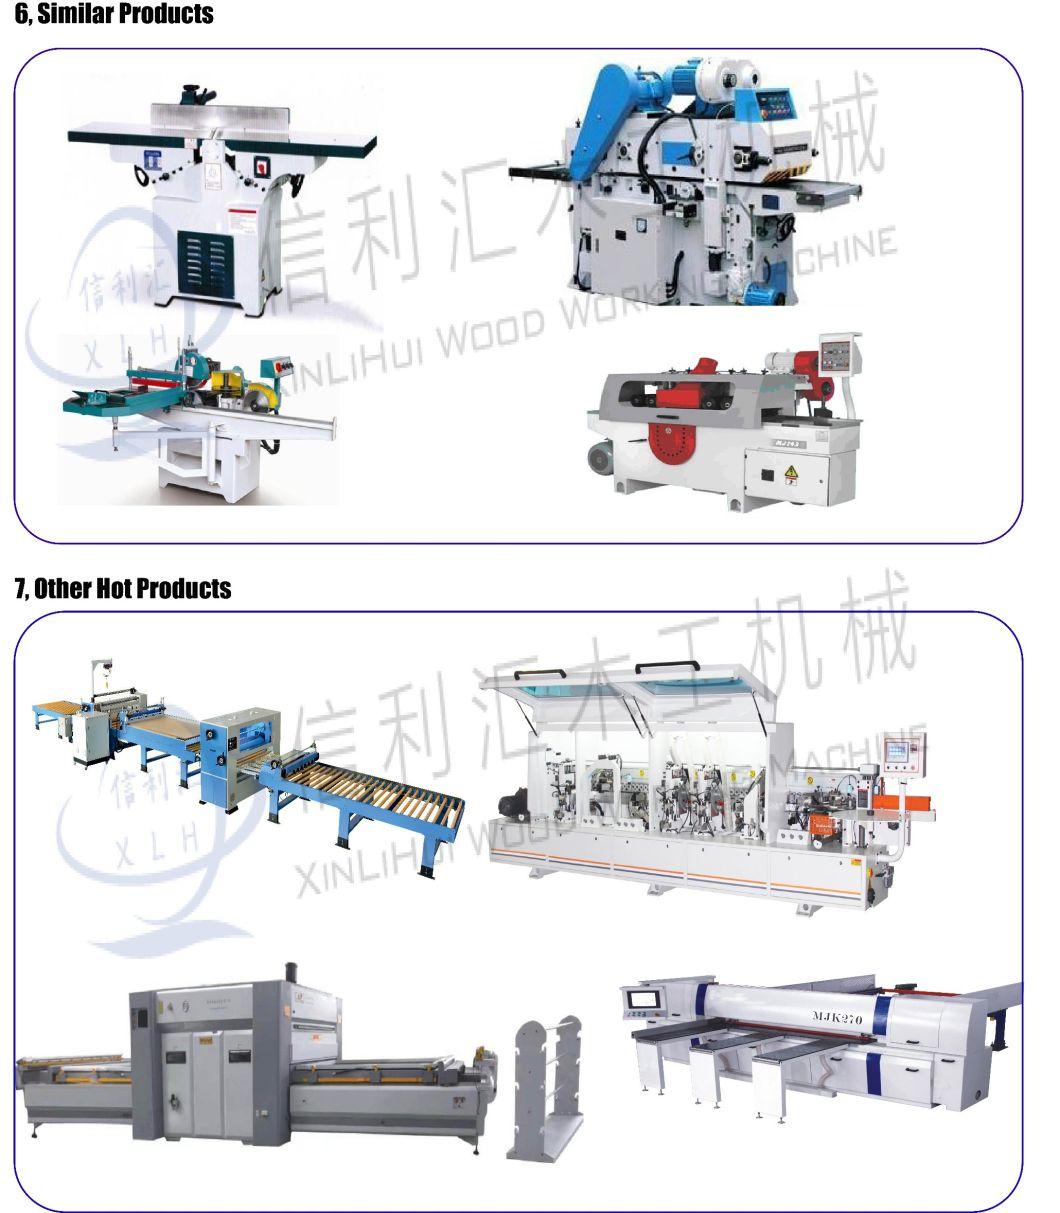 Mjr 1220*2440 Finger Joint Board Gantry Saw Machine/ Big Board Band Sawing Machine / Finger Joint Plate Flat Cutting Band Saw with and Dust Hood